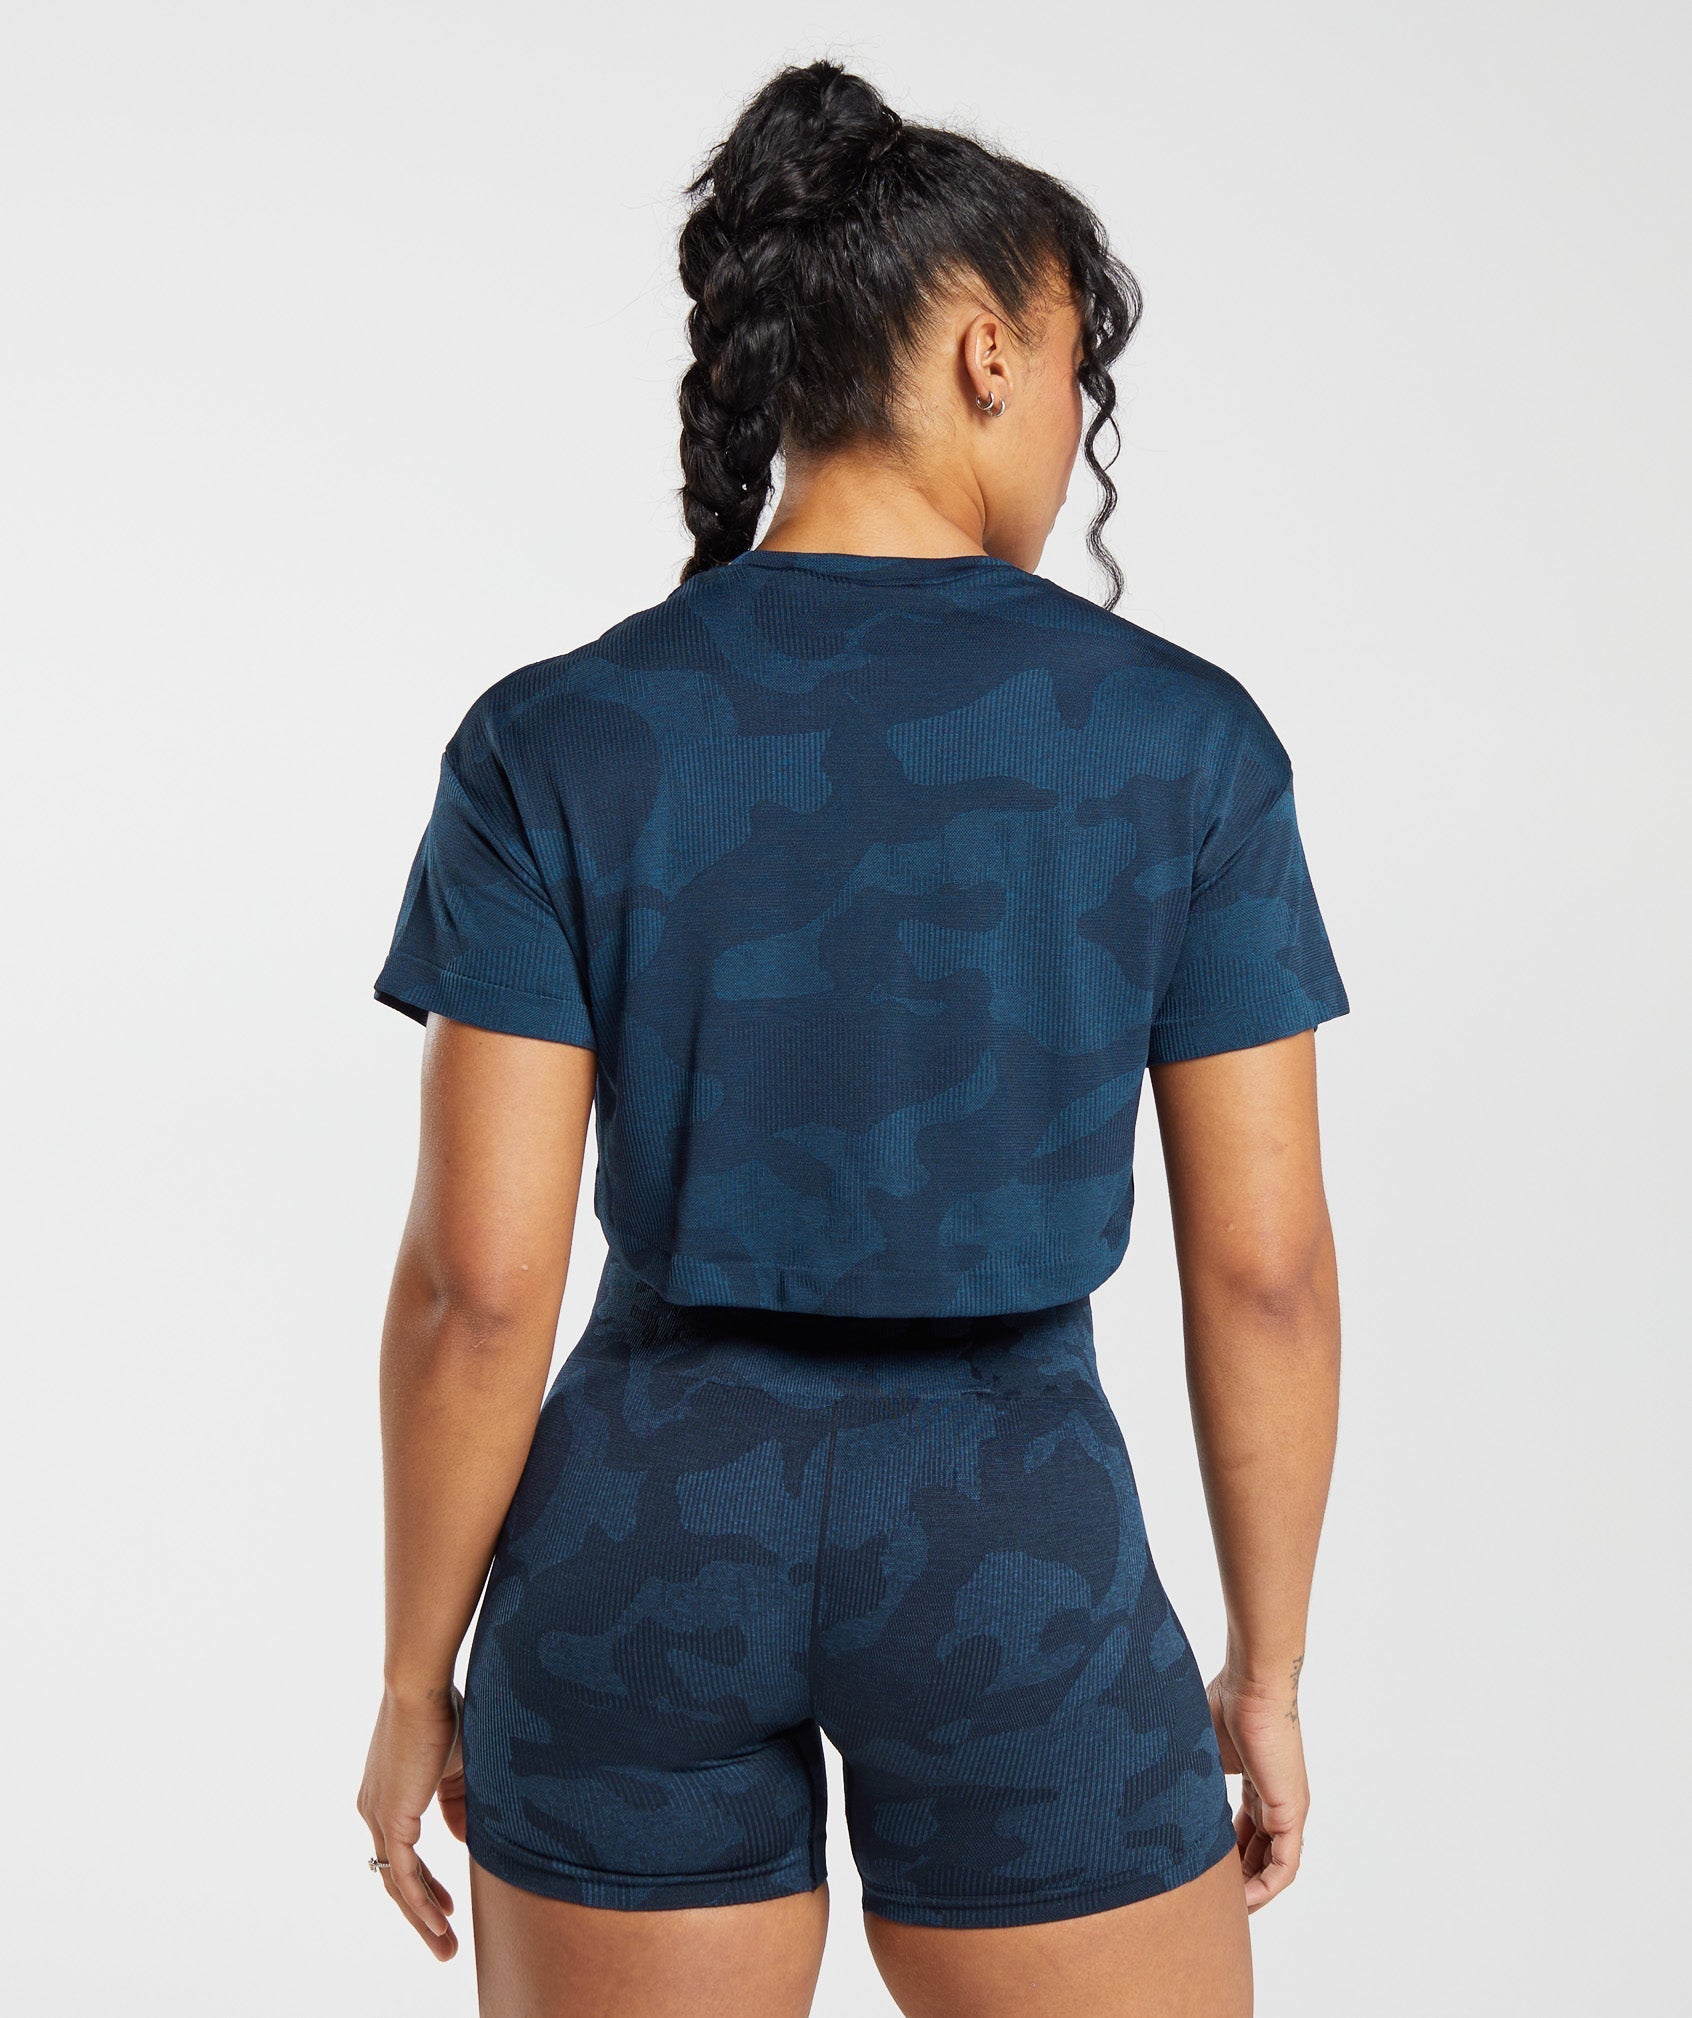 Adapt Camo Seamless Ribbed Crop Top in Midnight Blue/Ash Blue - view 2